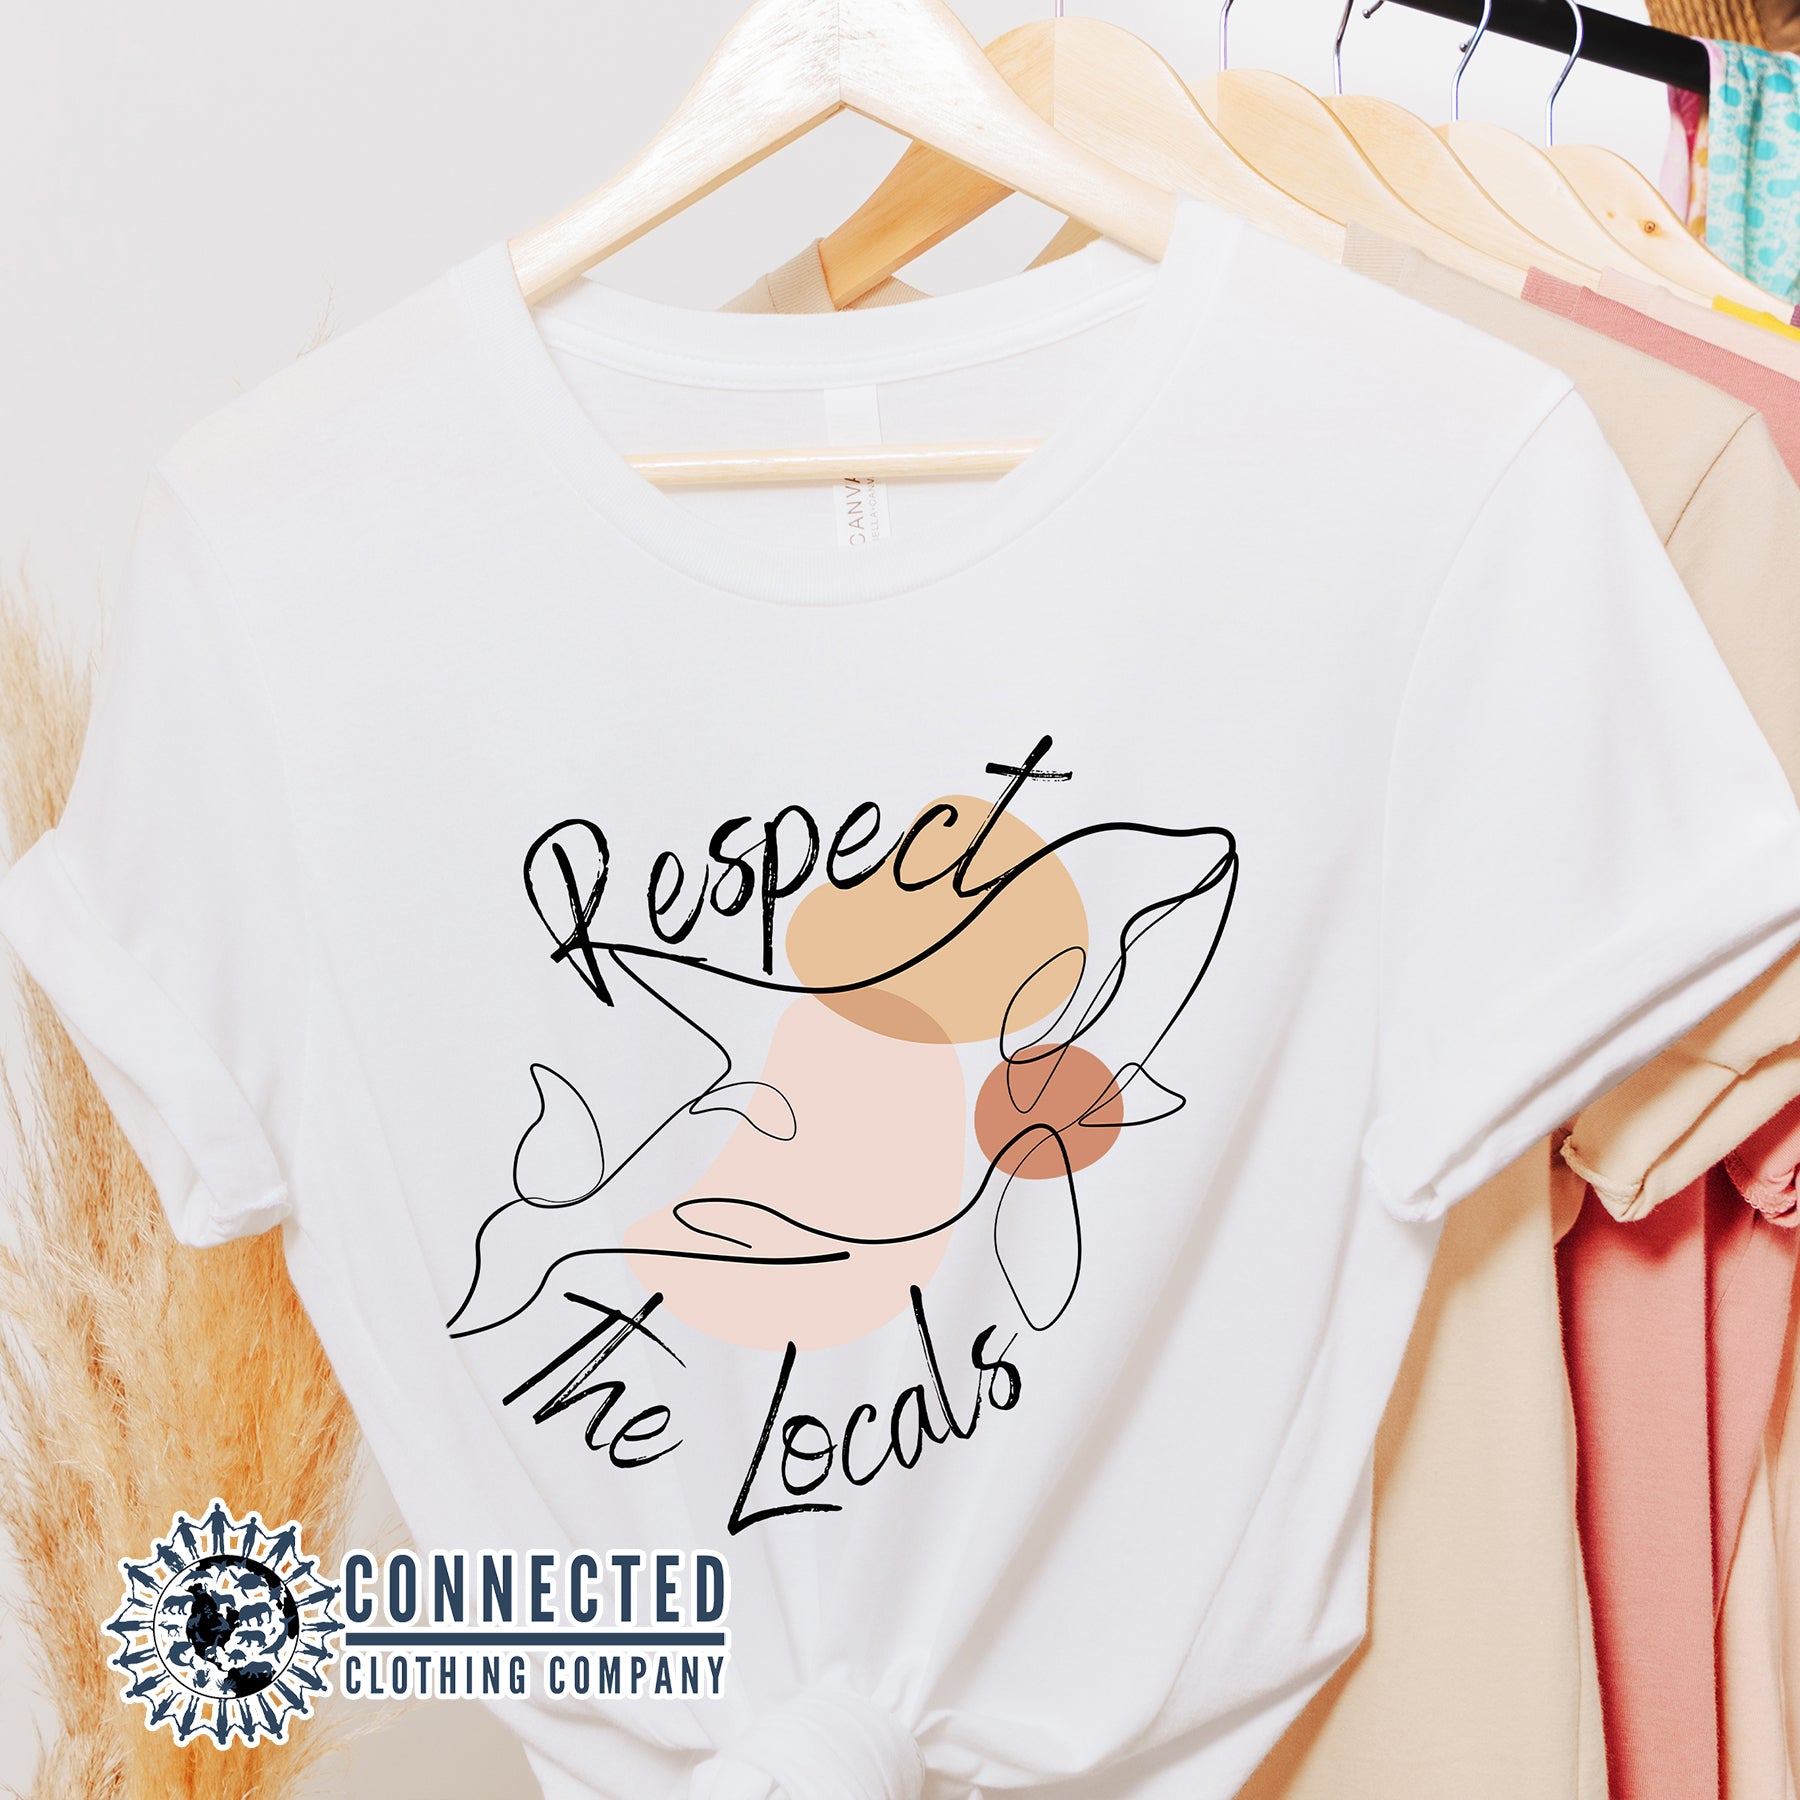  White Respect The Locals Orca Unisex Short-Sleeve Tee - Connected Clothing Company - Ethically and Sustainably Made - 10% of profits donated to orca conservation